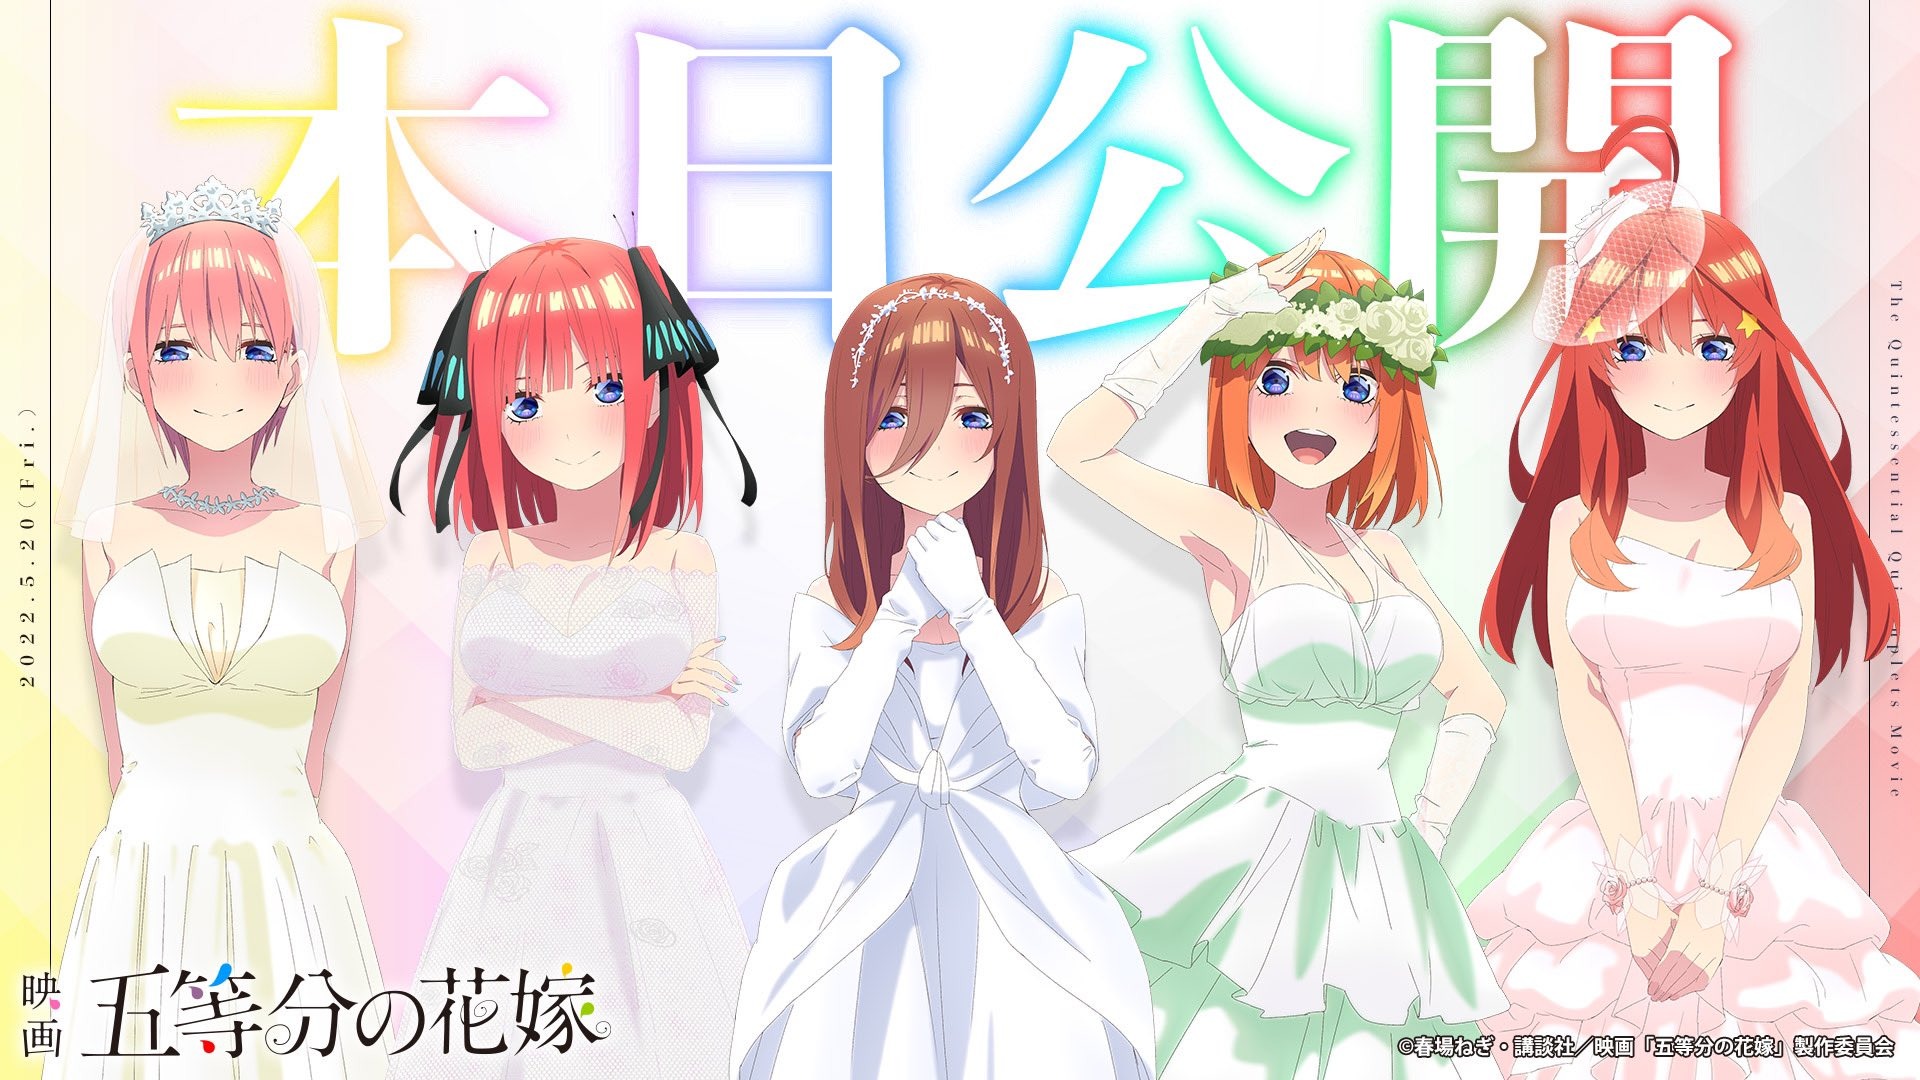 Crunchyroll - The Quintessential Quintuplets Put On Their Wedding Gowns in  New Anime Movie Visual